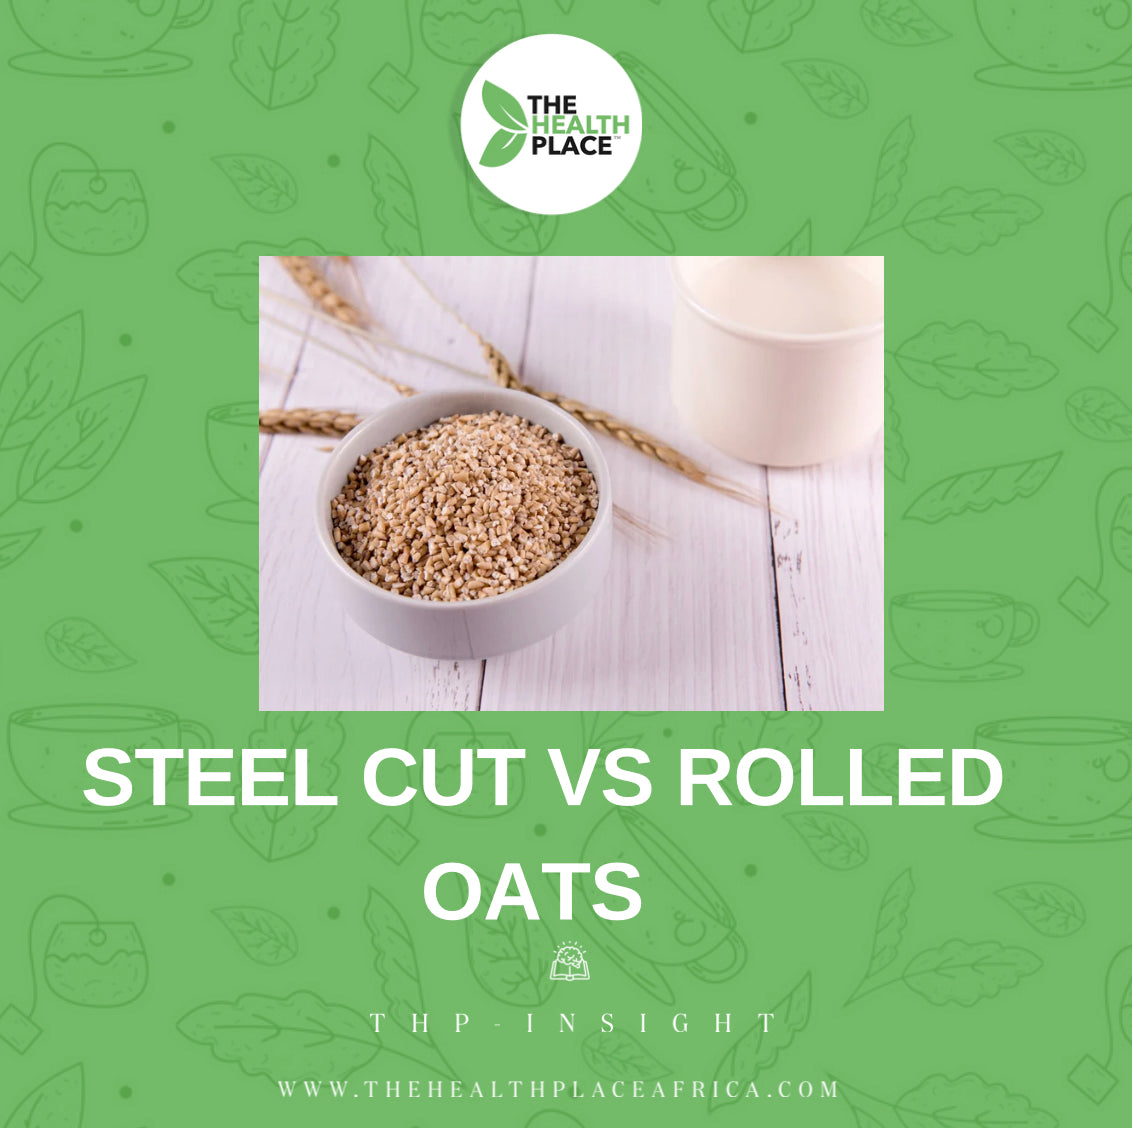 Steel Cut Oats VS Rolled Oats- The Differences